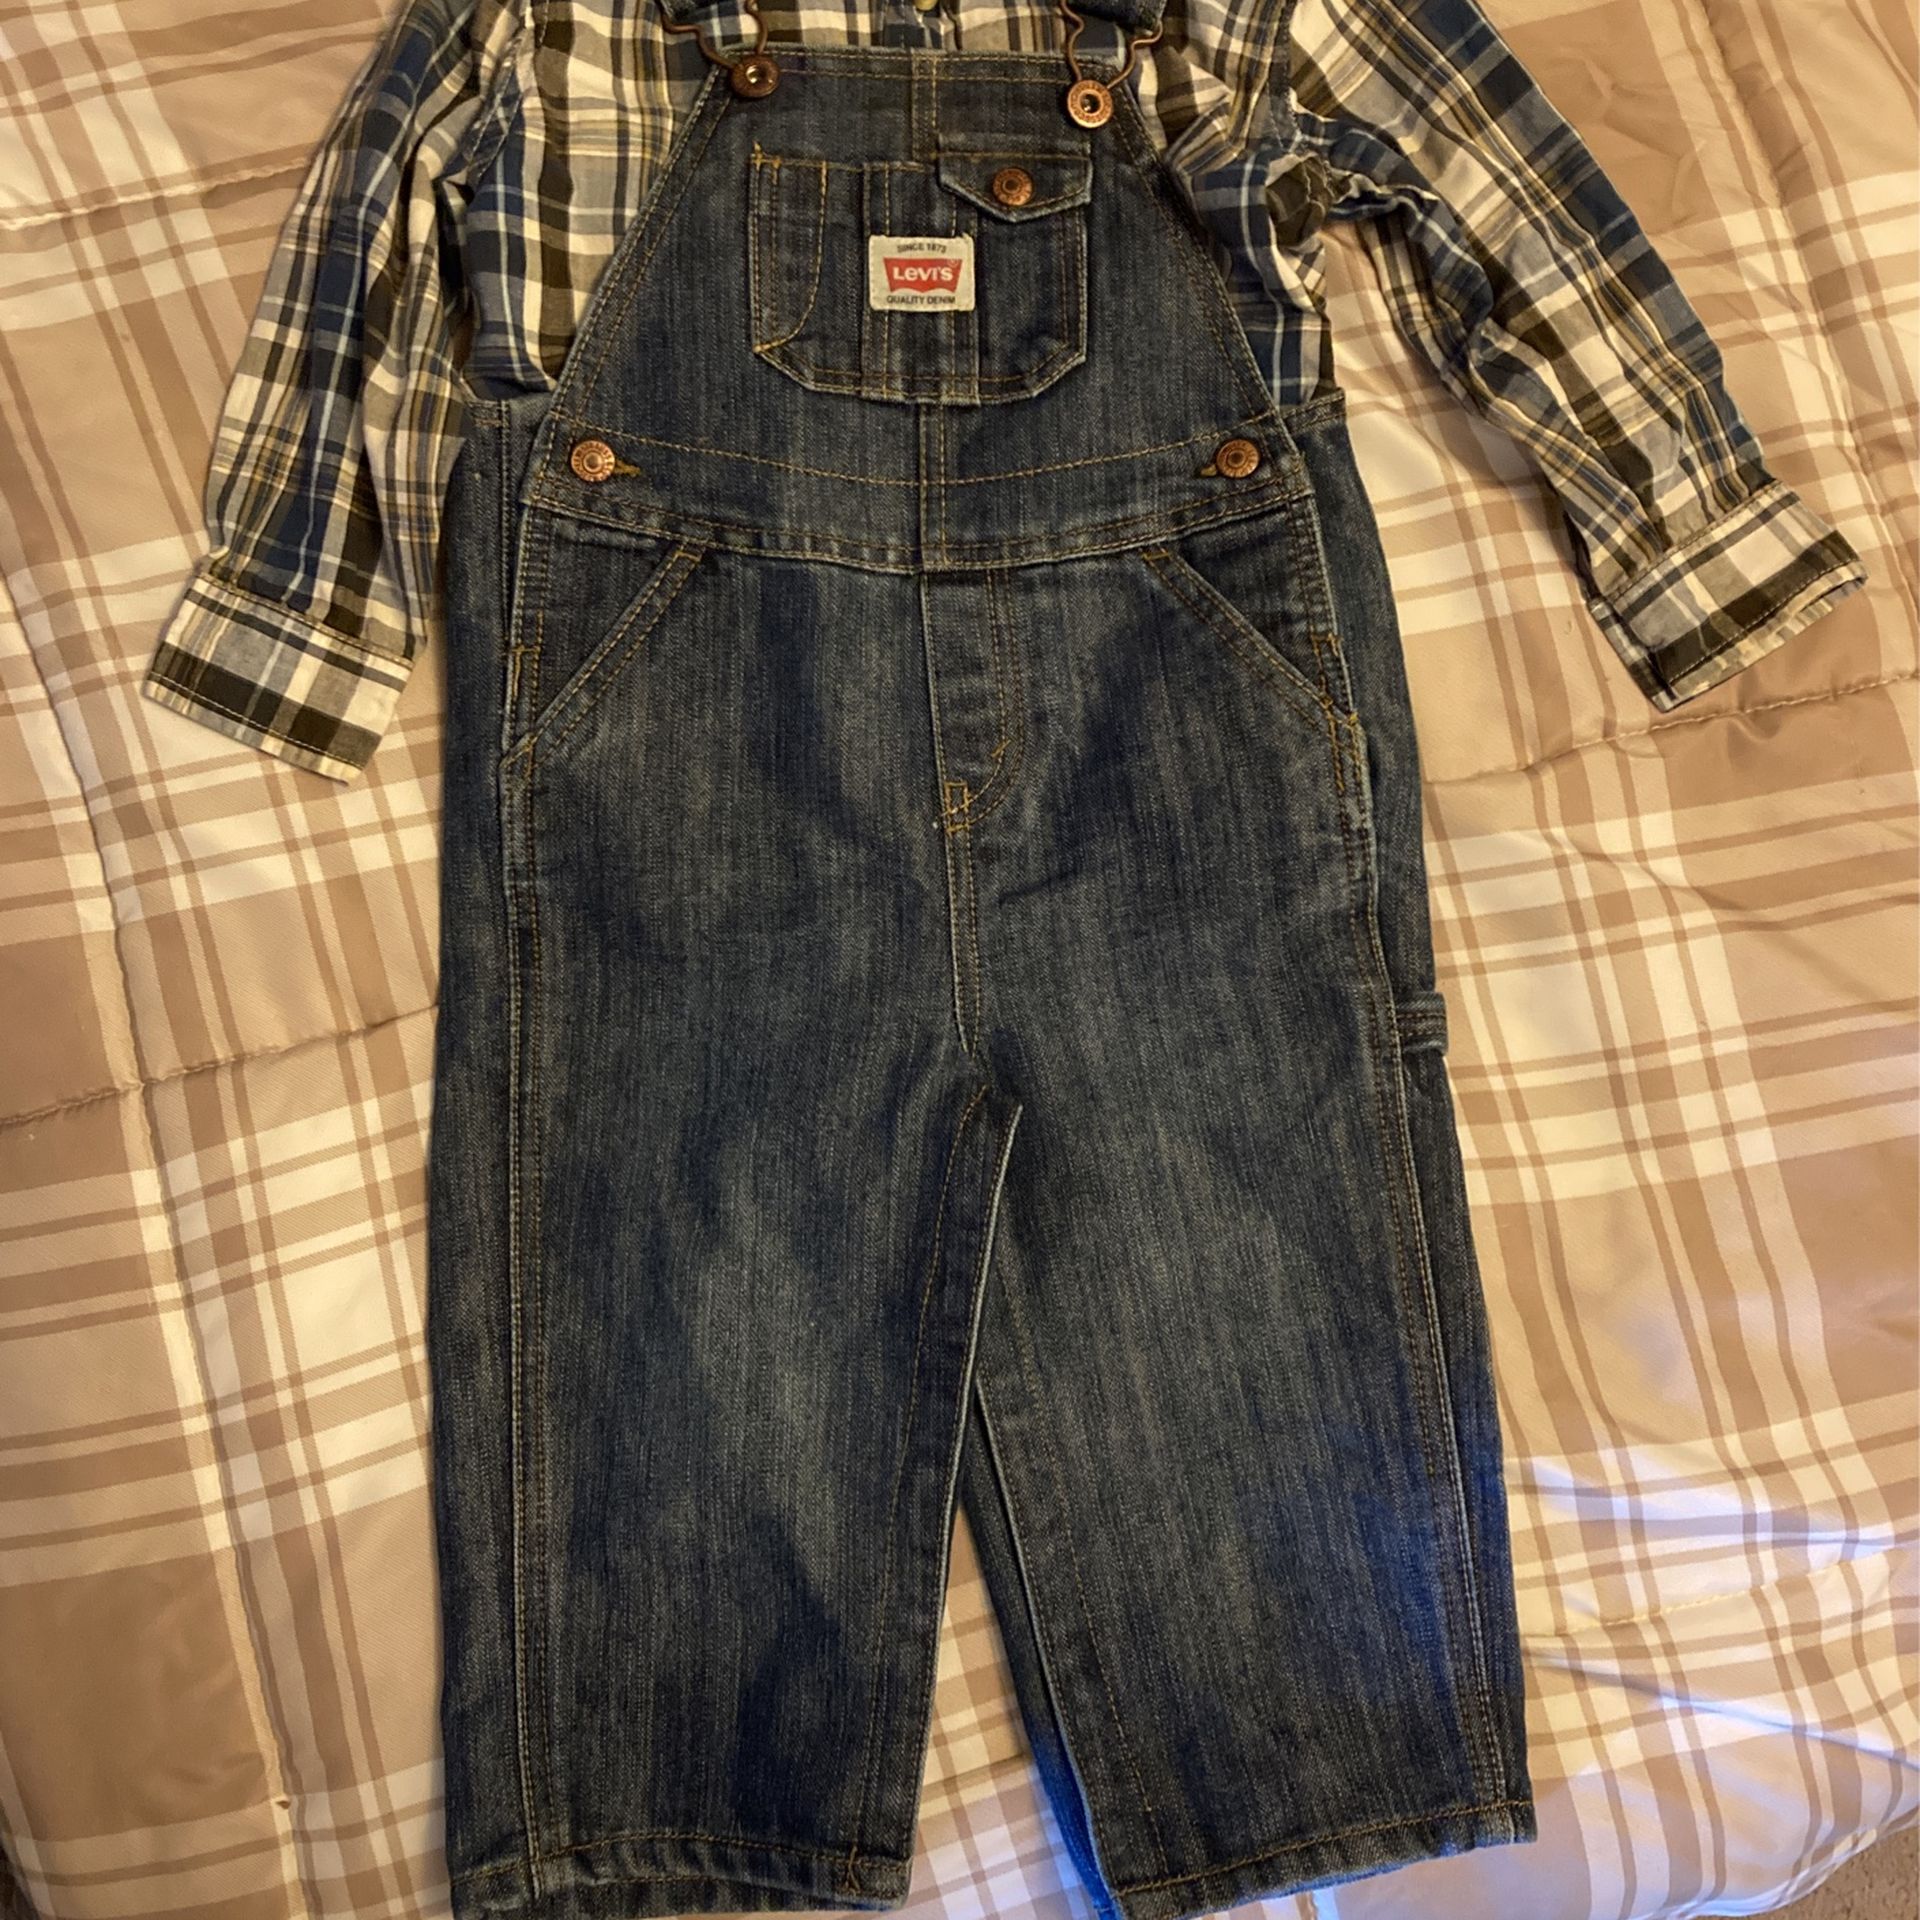 Levi’s Blue Jean Overalls Size 24 Mo + Timberland Plaid Shirt 3T